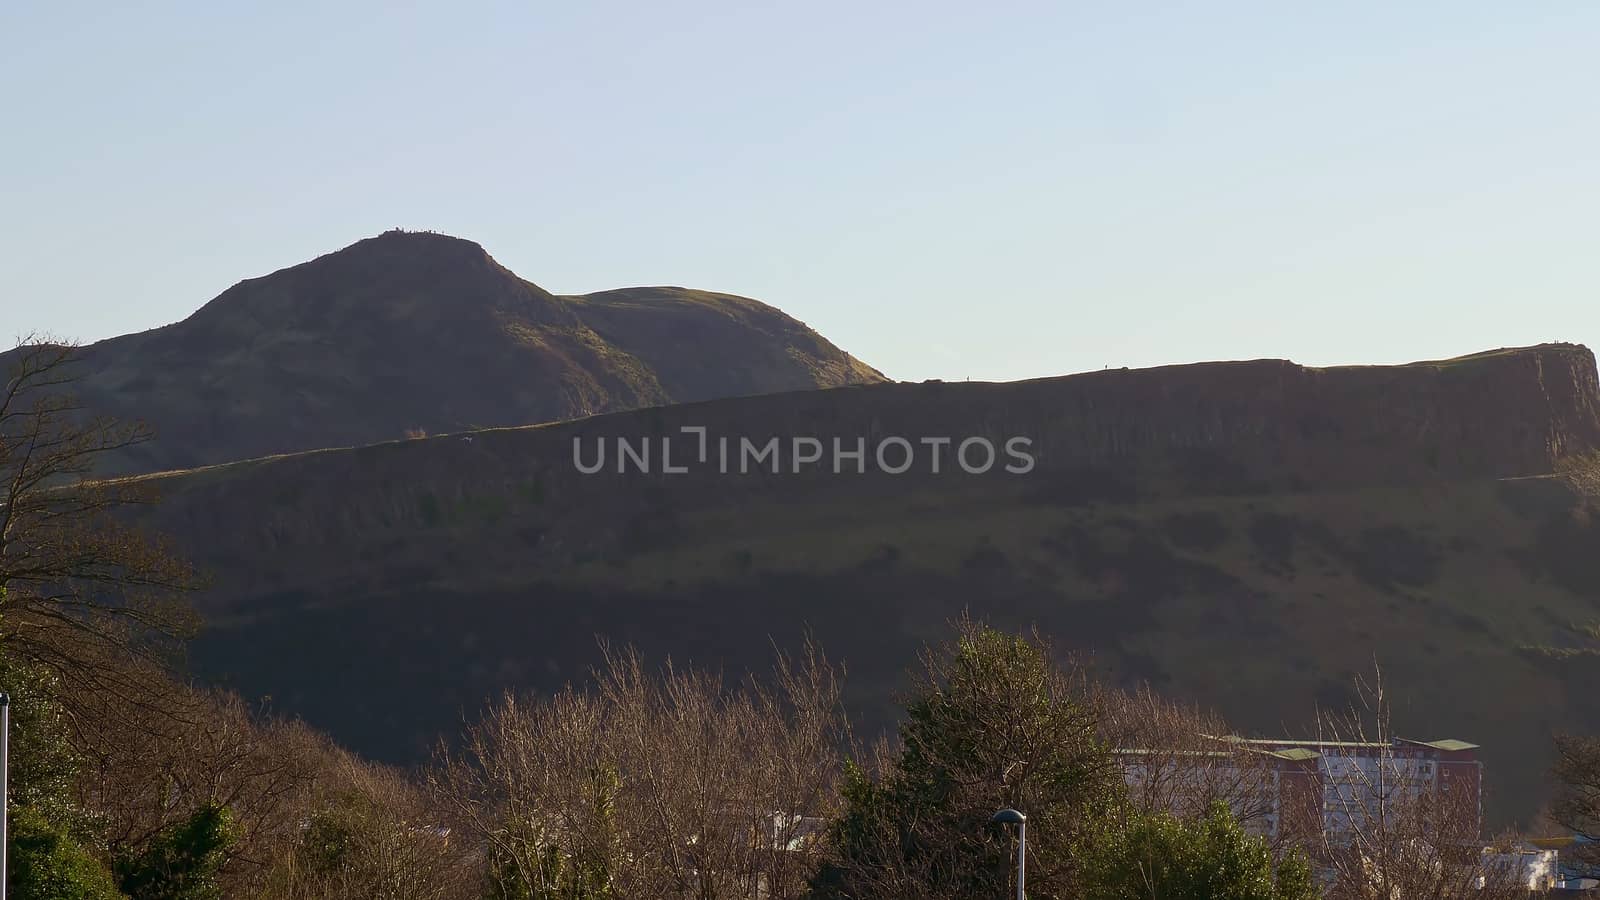 Panoramic view over Edinburgh from Calton Hill - travel photography